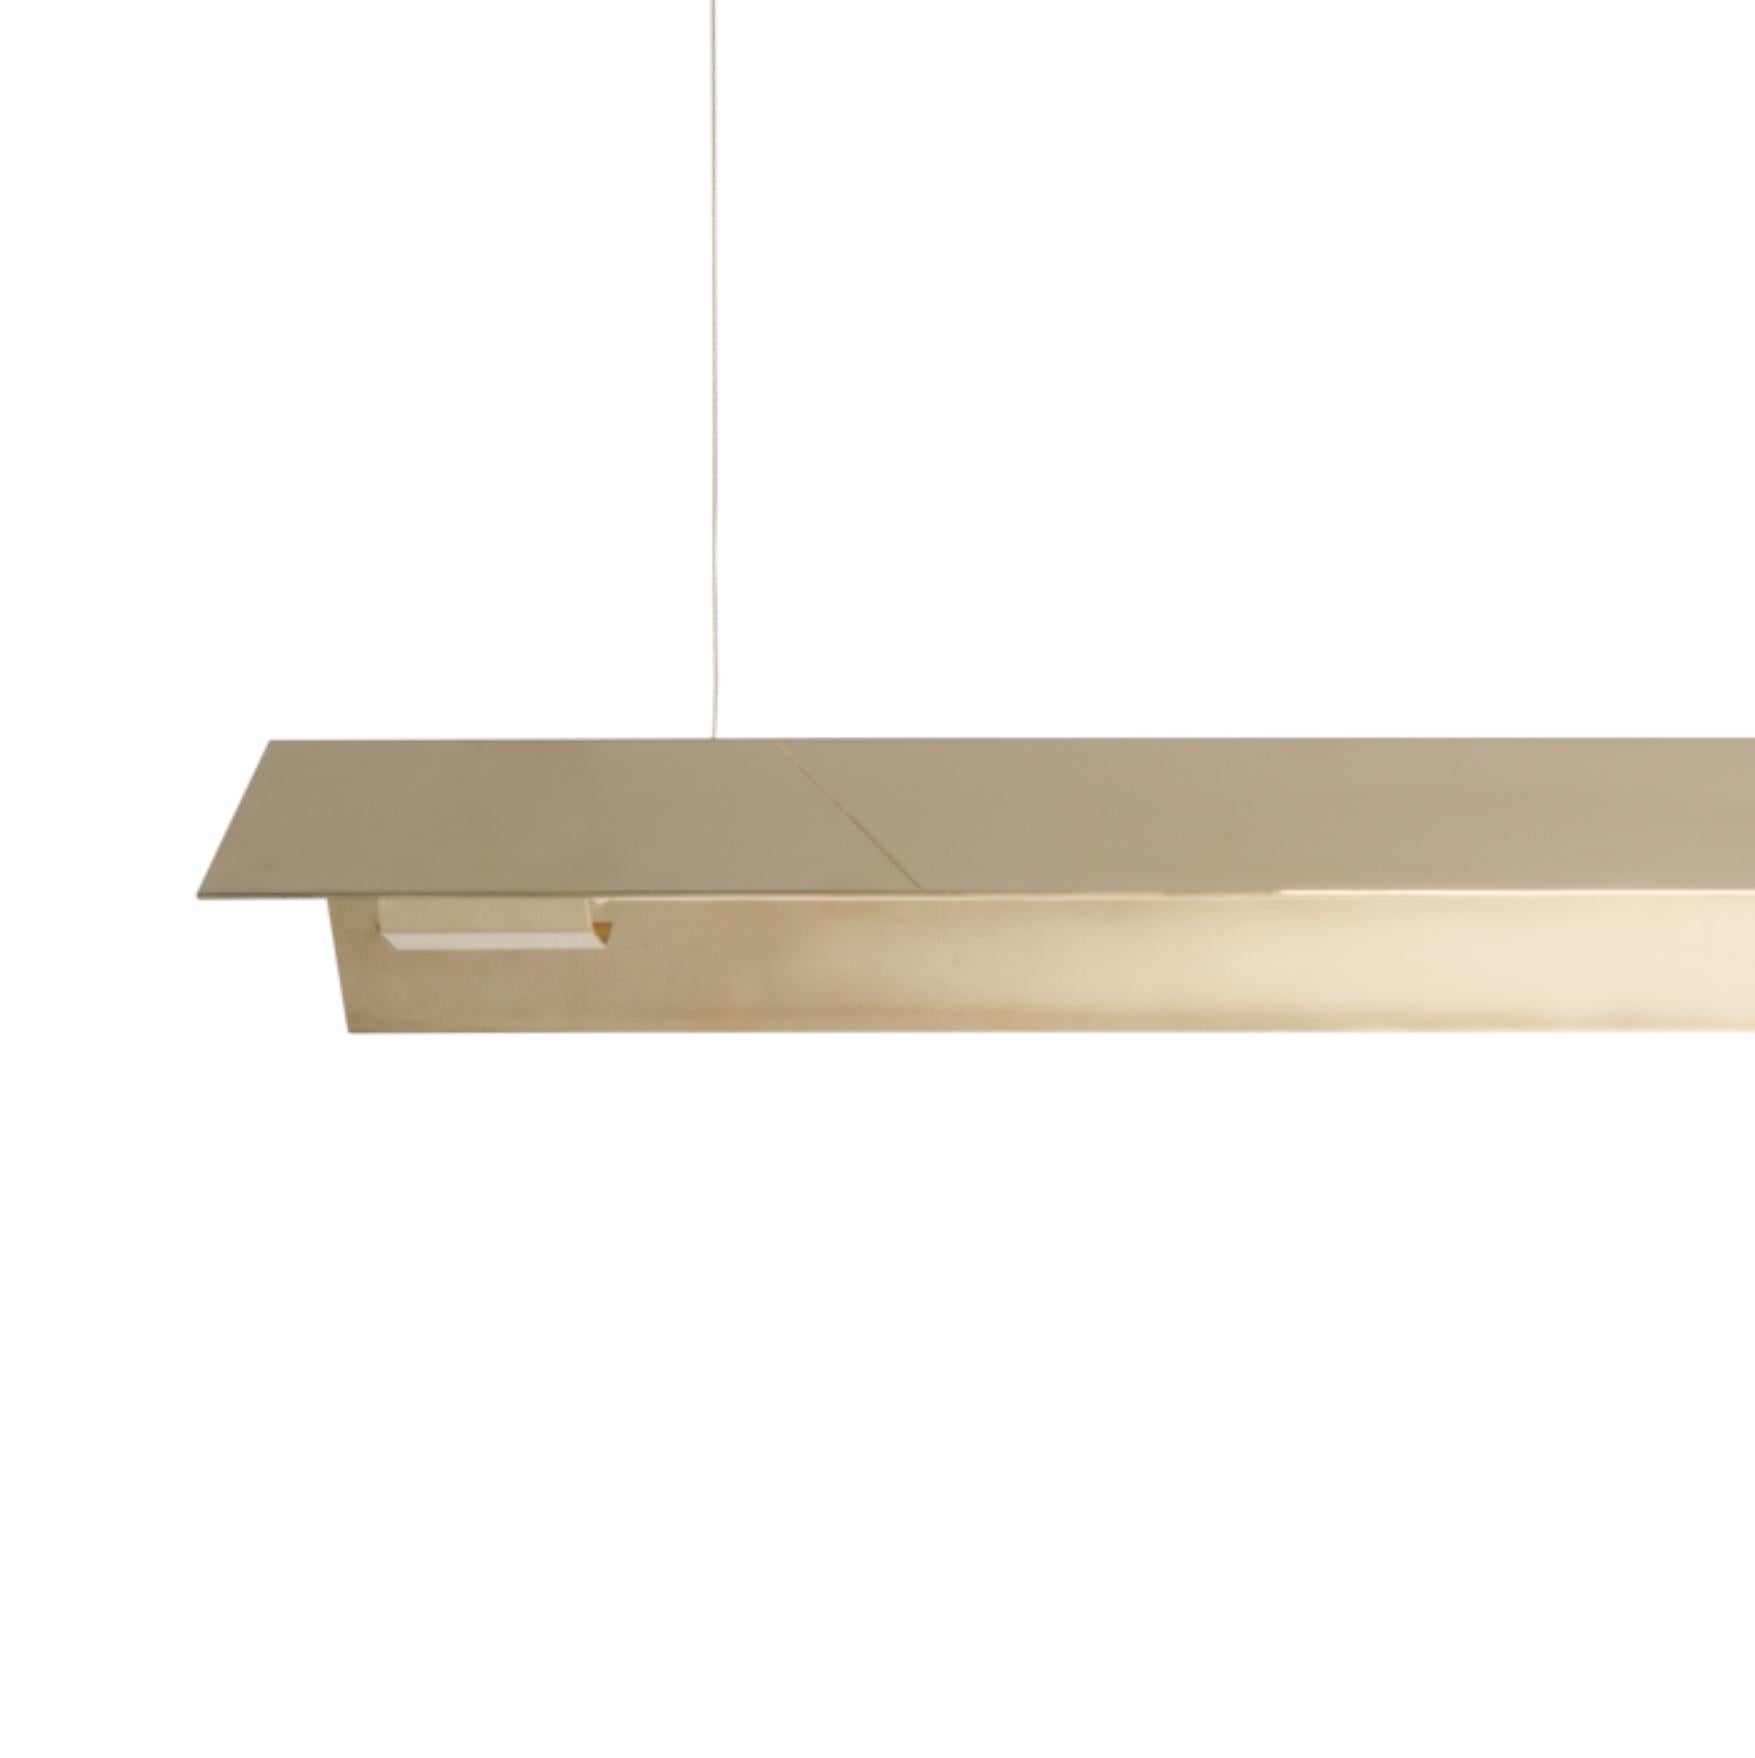 Extra large Misalliance solid brass suspended light by Lexavala
Dimensions: D 16 x W 160 x H 8 cm
Materials: Brass.

There are two lenghts of socket covers, extending over the LED. Two short are to be found in Suspended and Surface, and one long